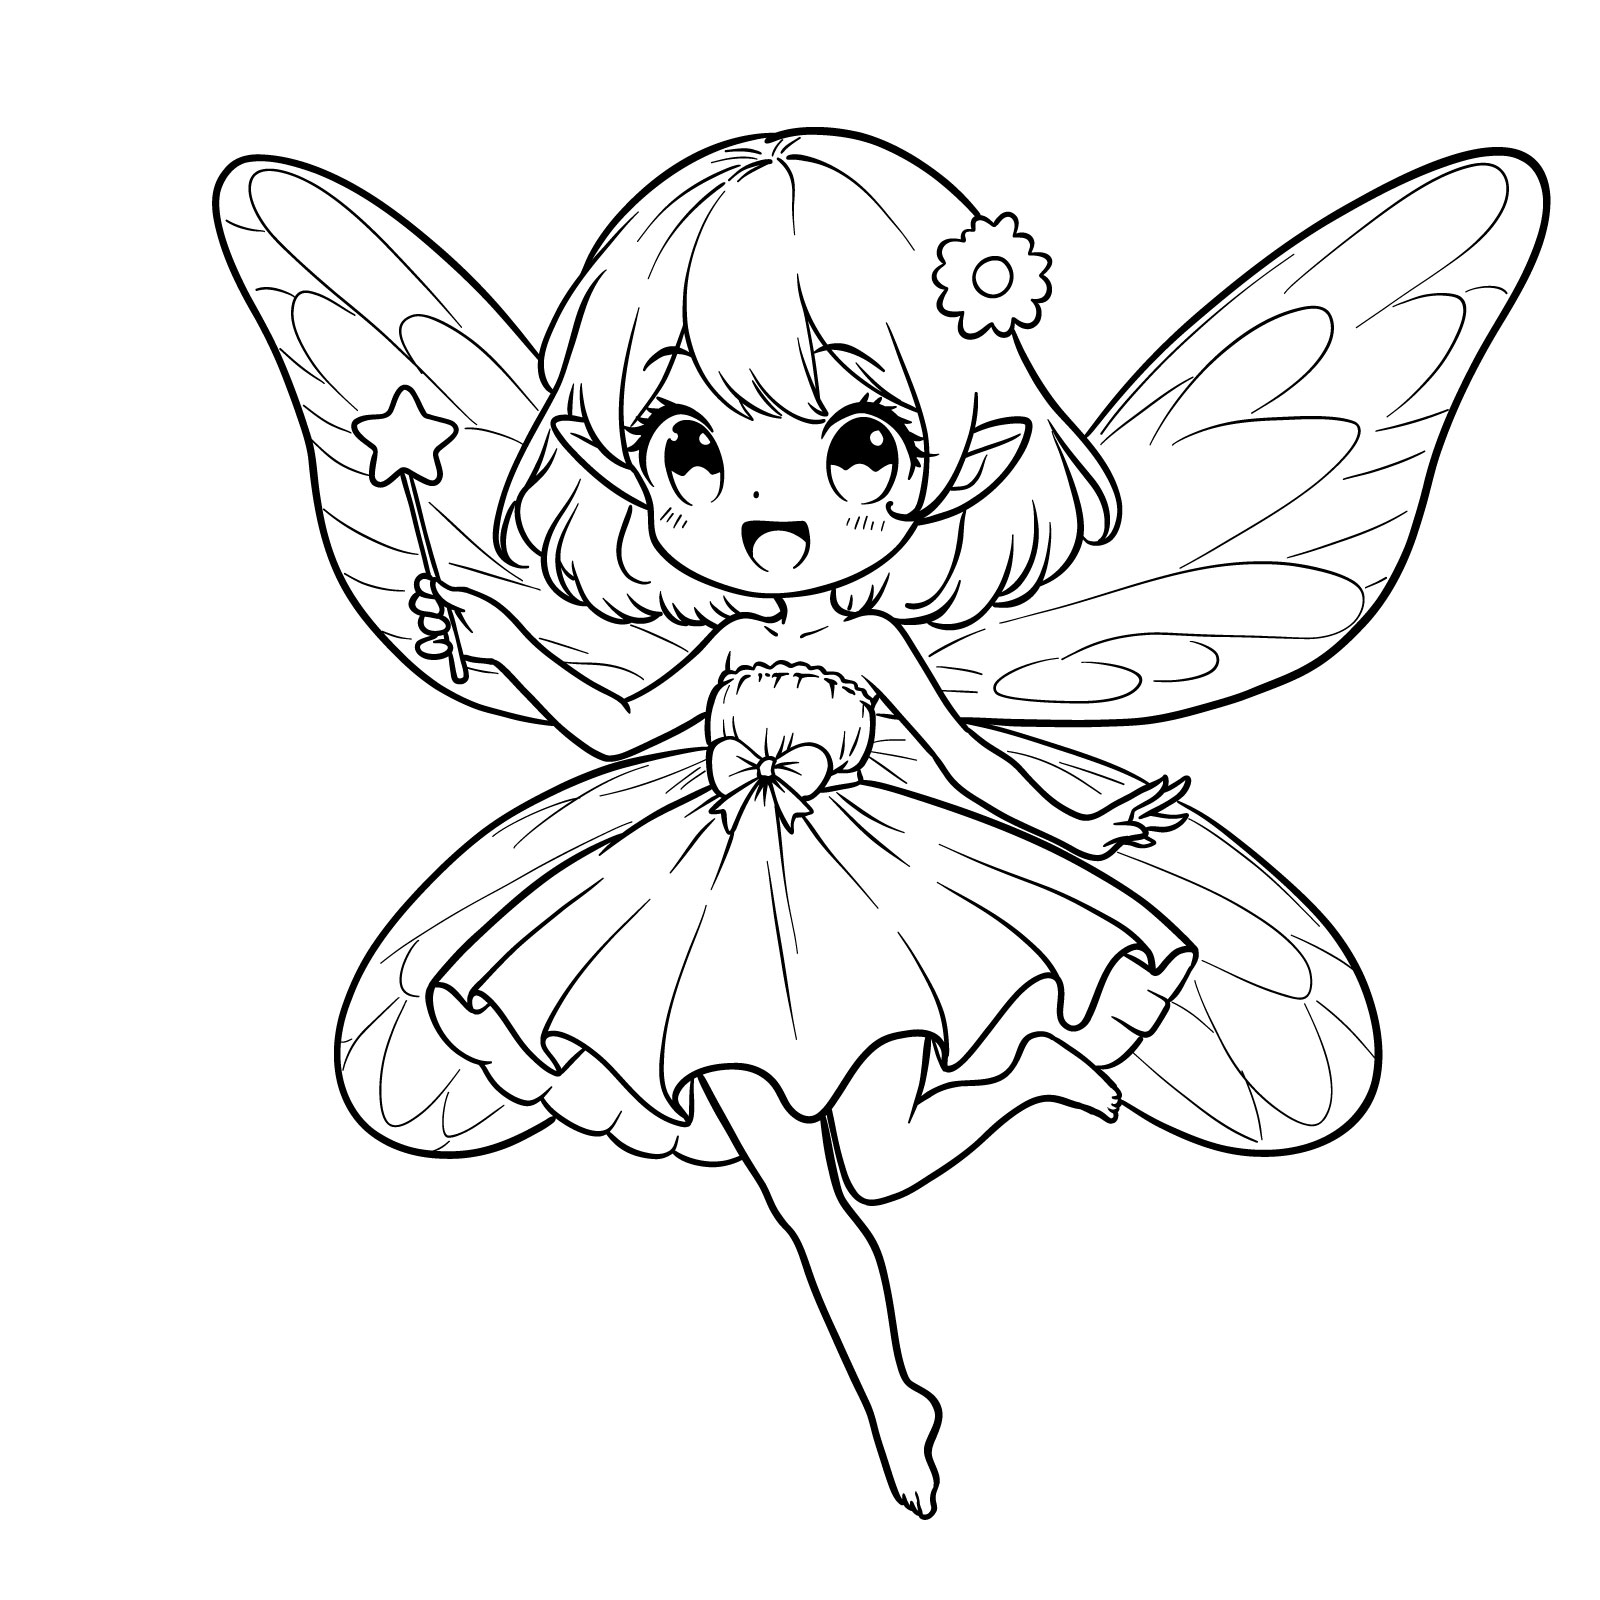 Complete drawing of an anime fairy, ready to inspire creativity - final step